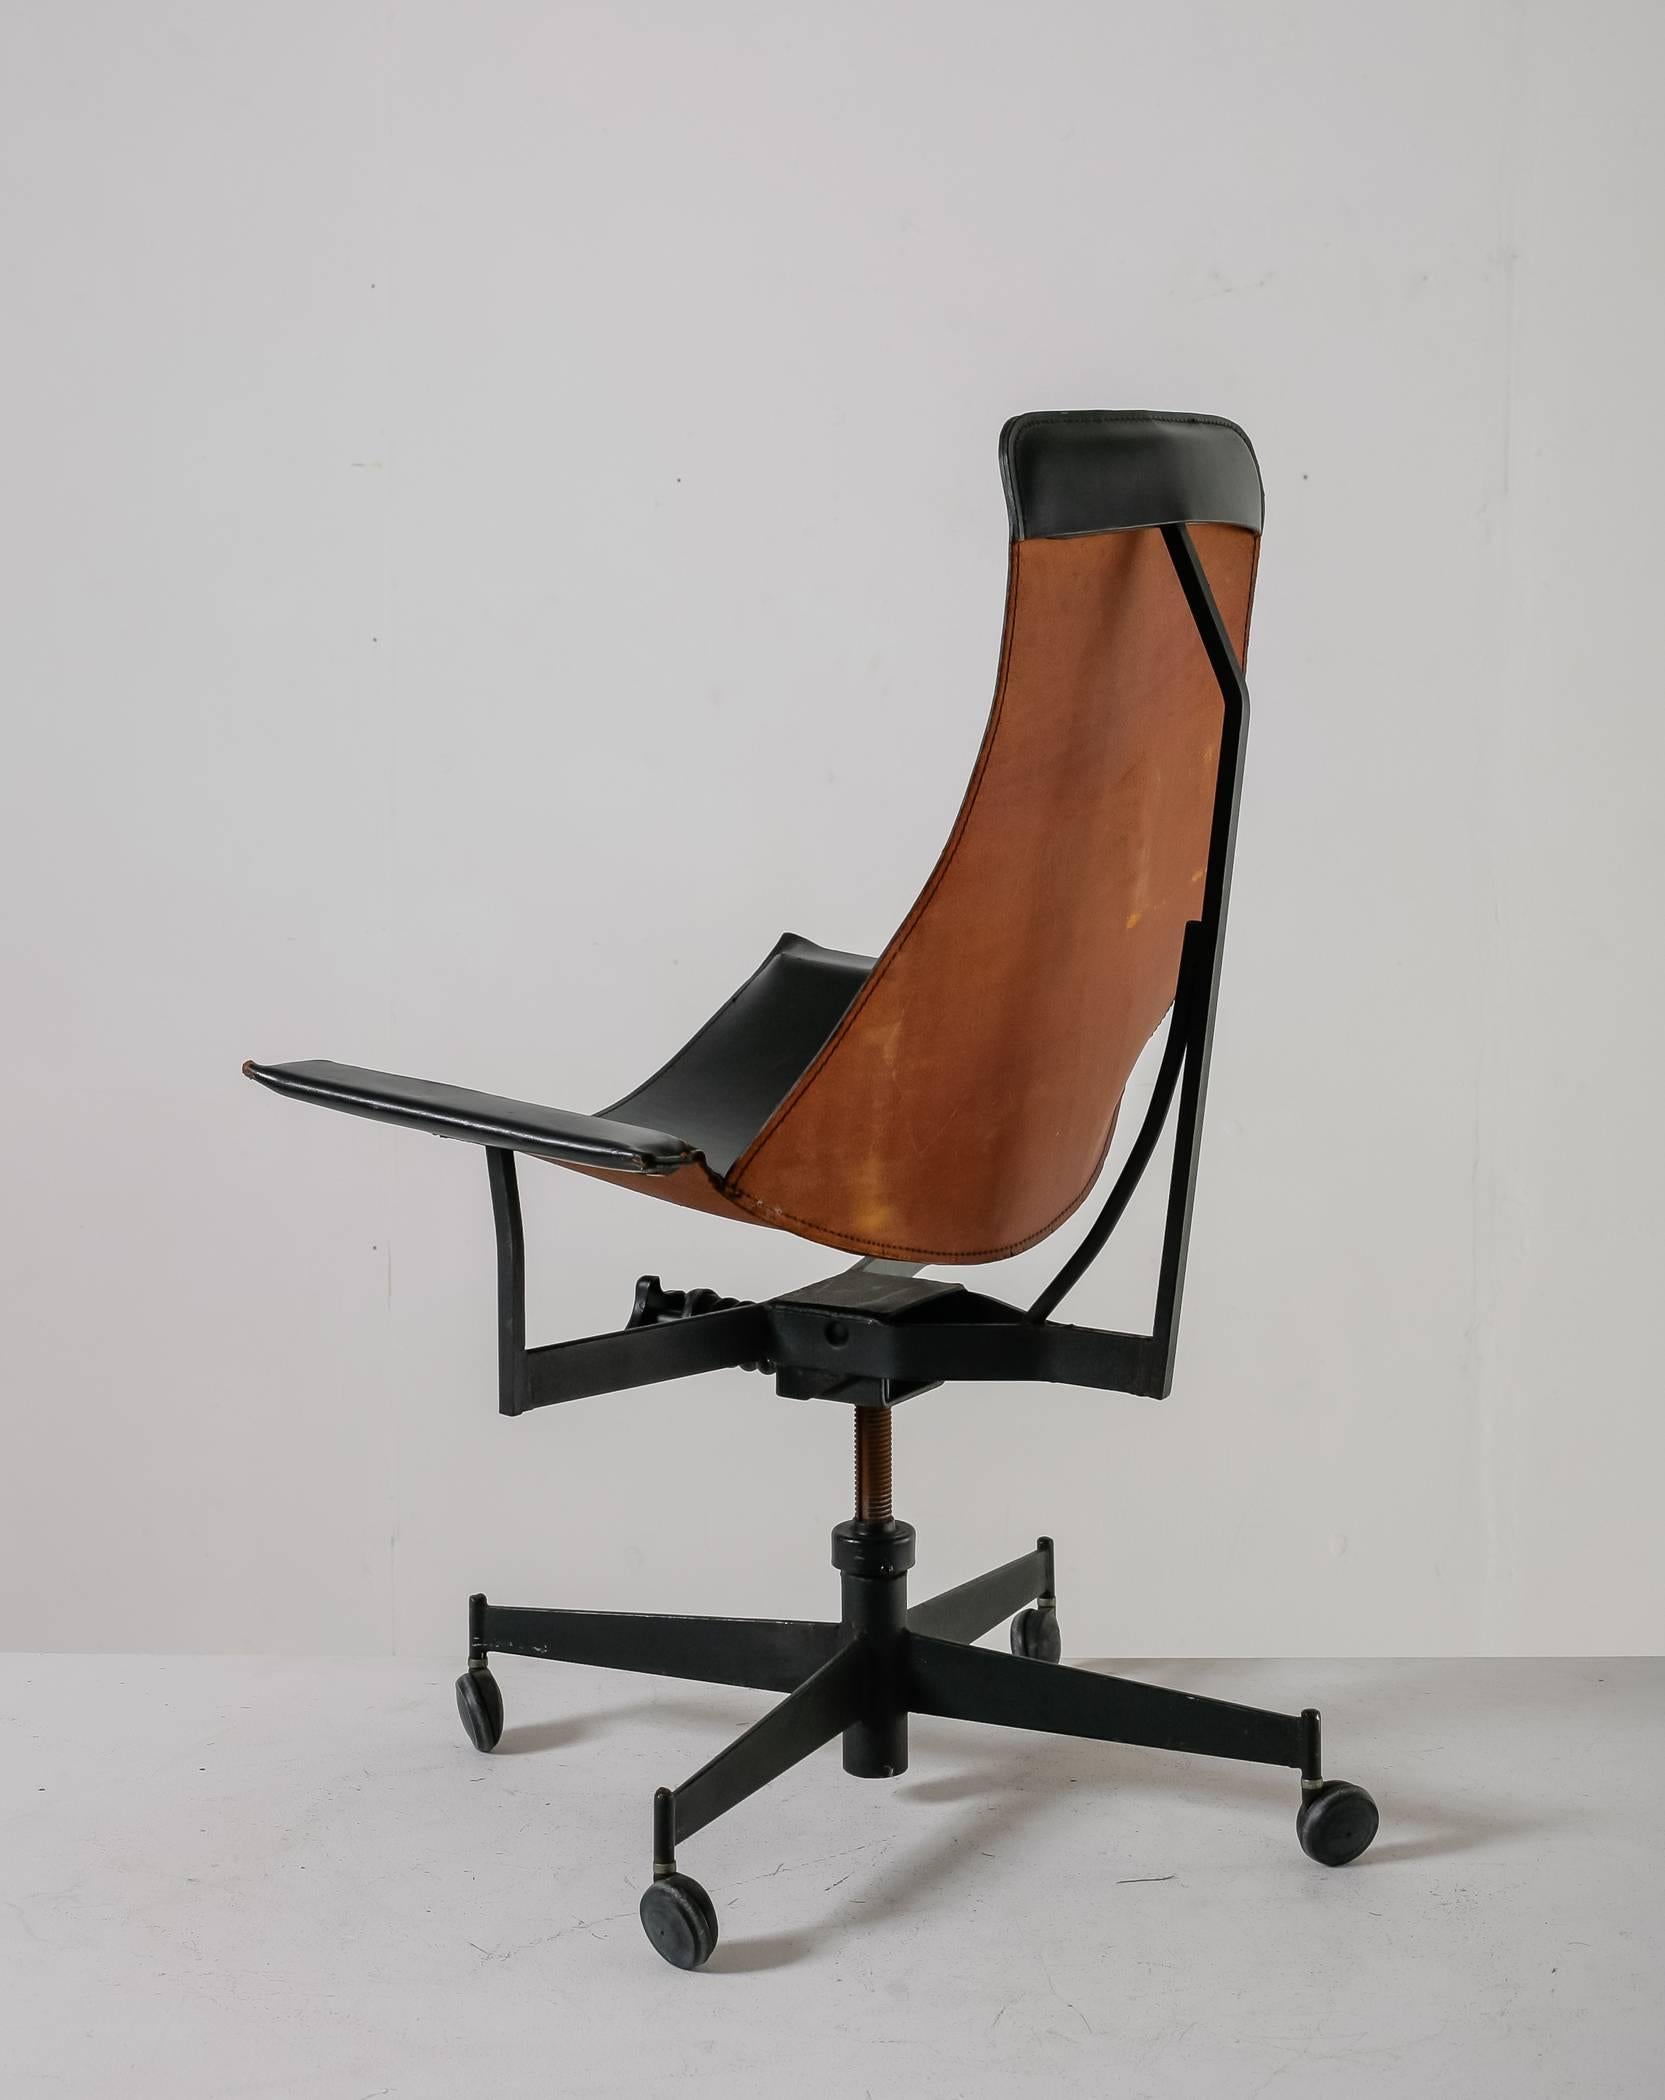 A swiveling and height-adjustable chair with a black and brown leather sling seat in a metal frame, by American architect and designer William Katavolos. With its wheels, it is a perfect office chair, but can also be used as a lounge chair.
This